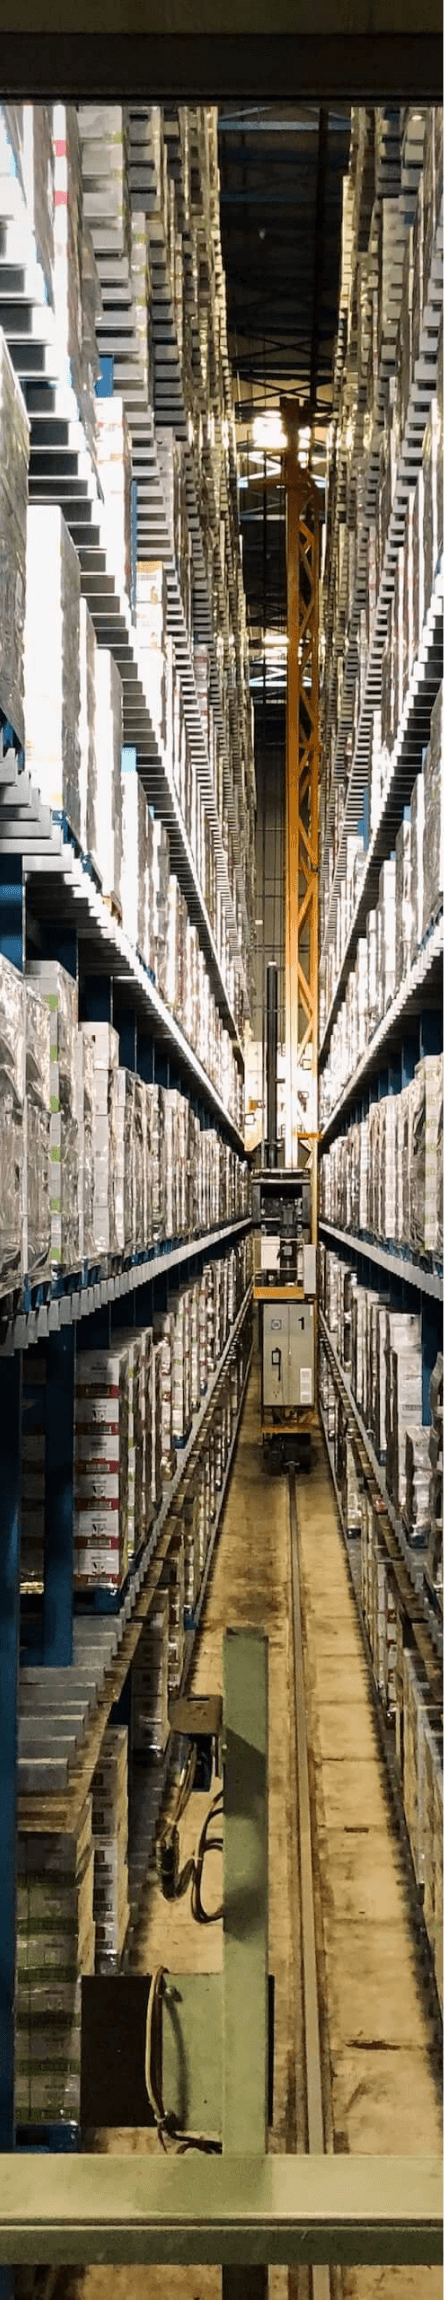 the benefits of implementing a lean supply chain